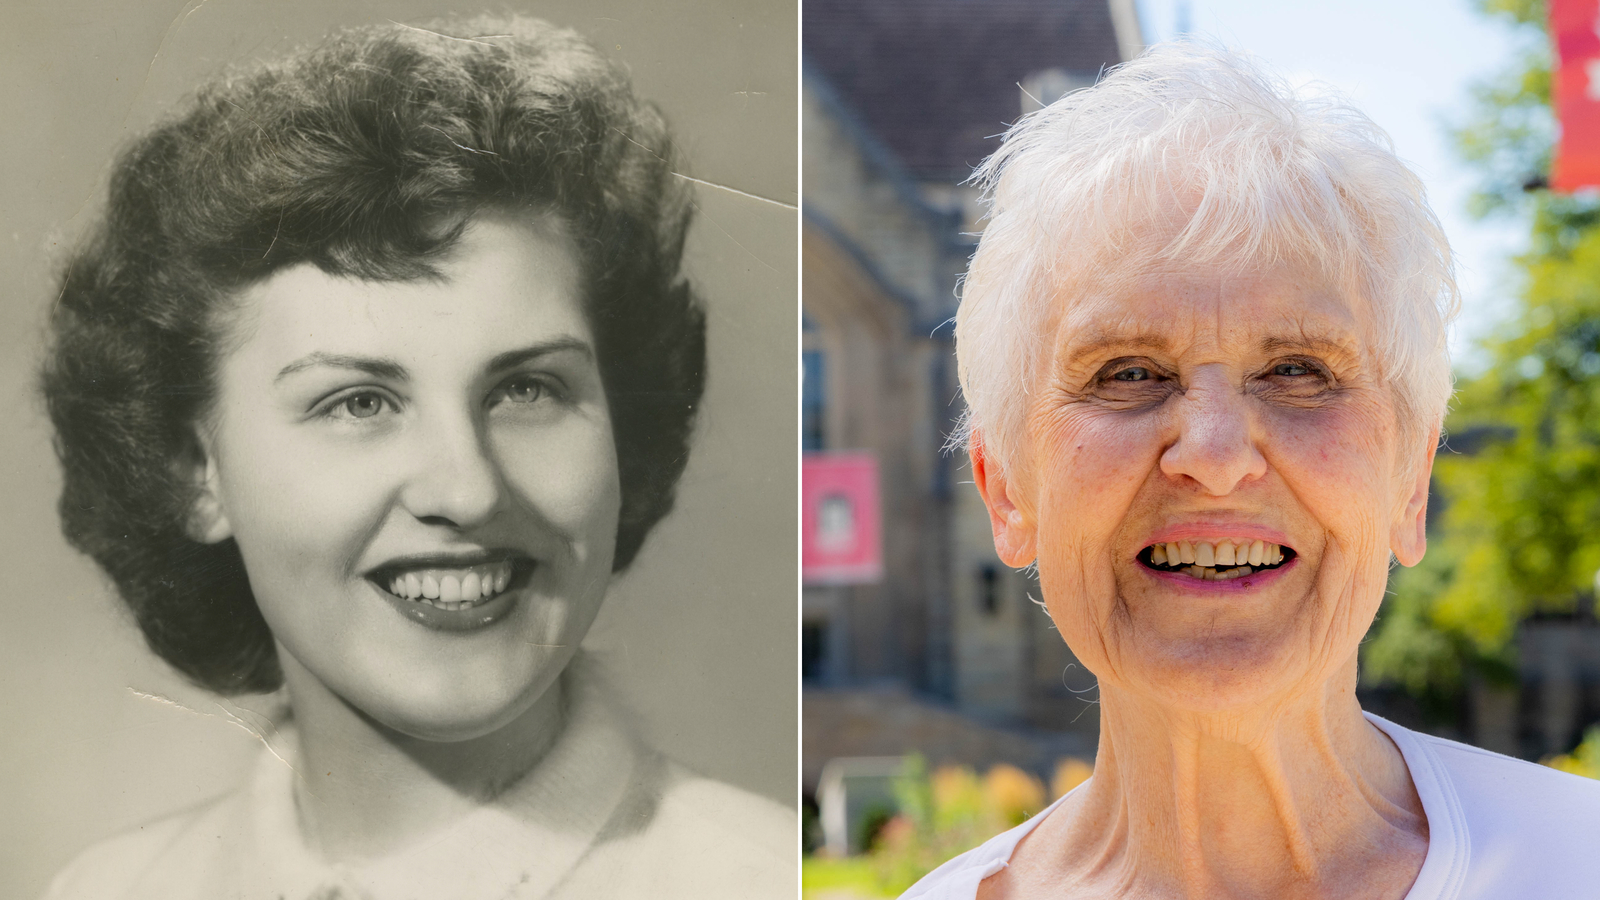 Joyce DeFauw's senior photograph from 1955, left, and the when she visited the college campus in Au...